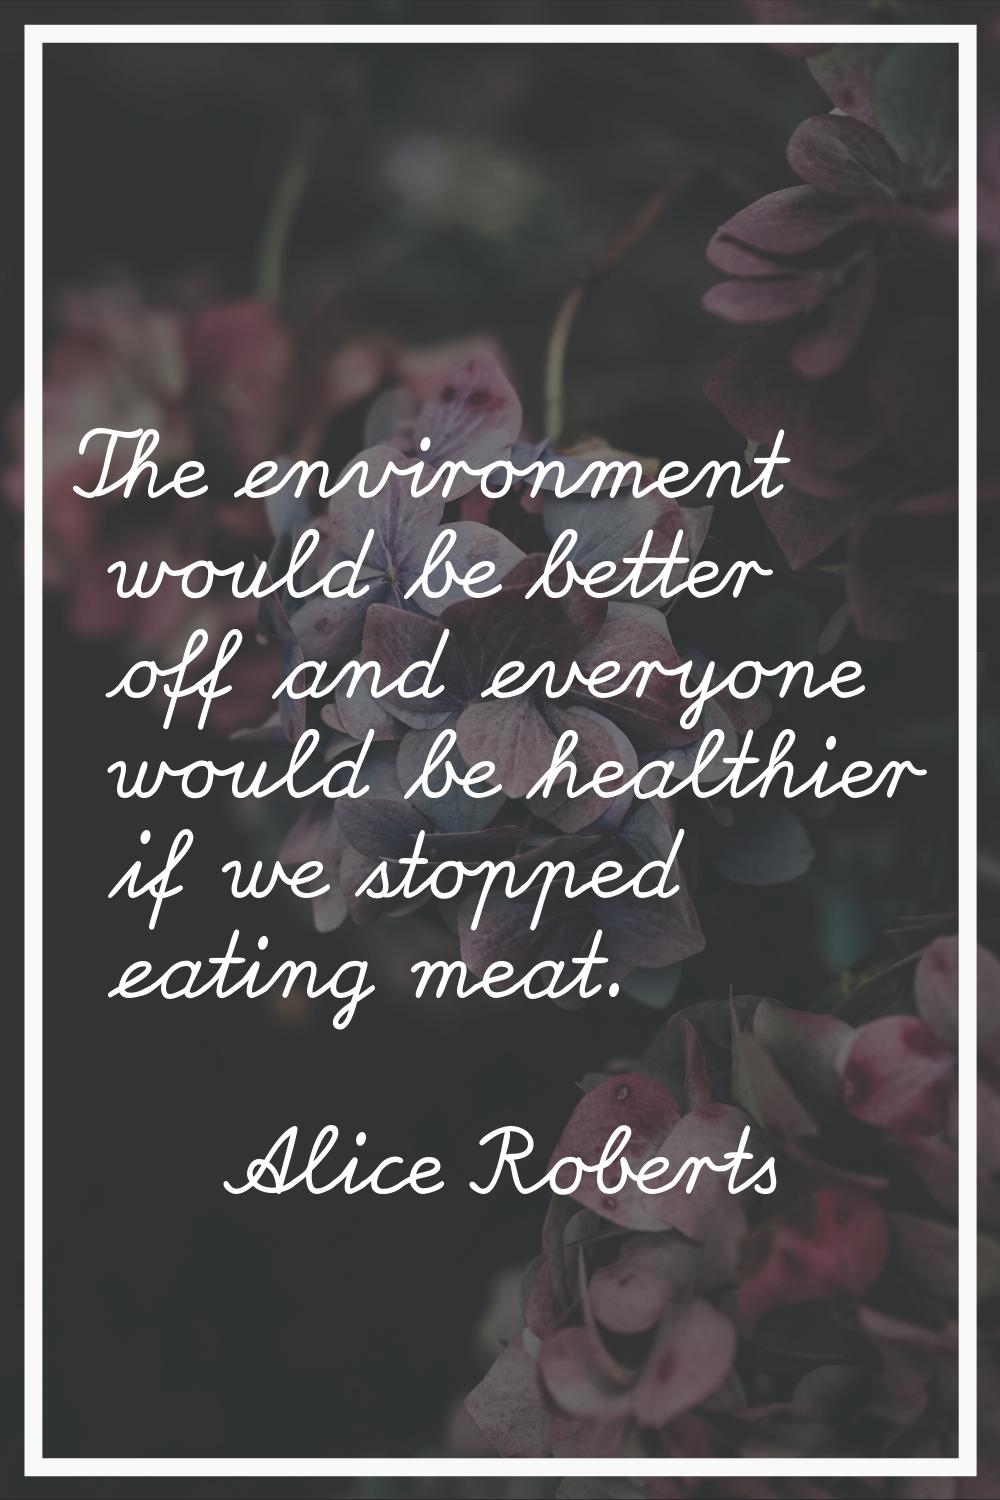 The environment would be better off and everyone would be healthier if we stopped eating meat.